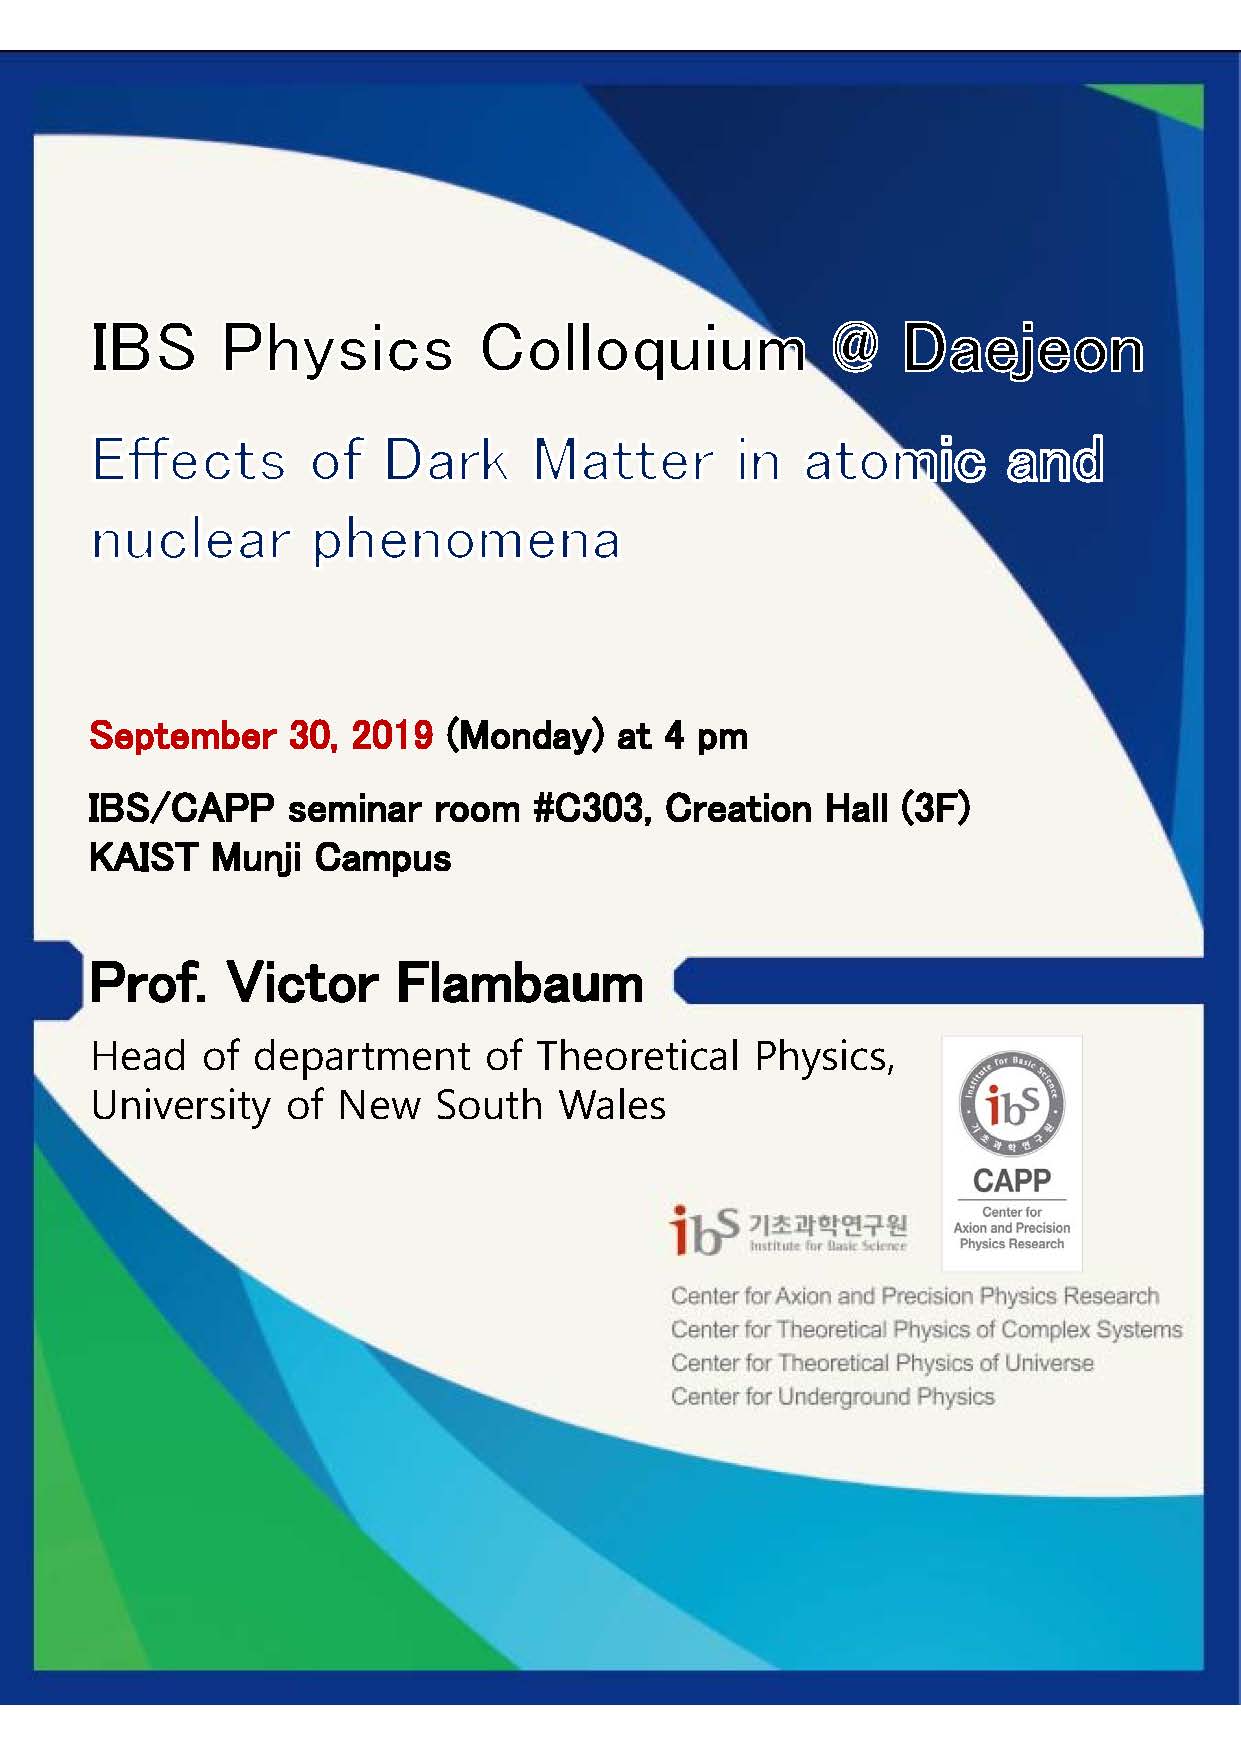 [IBS 콜로퀴움] Effects of Dark Matter in atomic and nuclear phenomena by Prof. Victor Flambaum